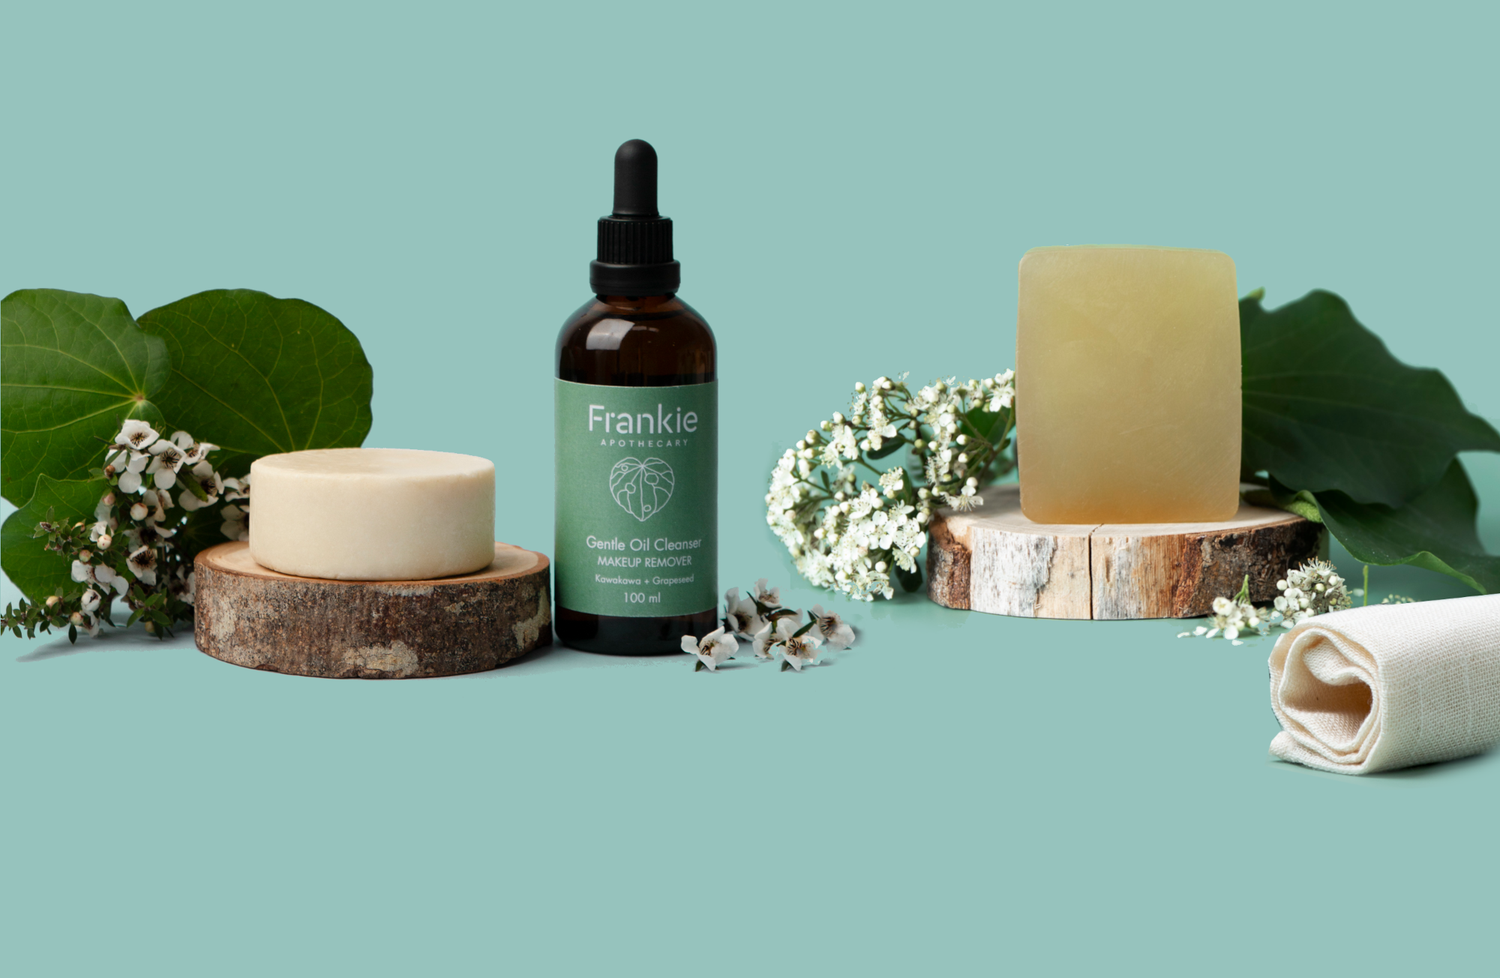 Introducing our Natural Cleansing Skin Care Collection